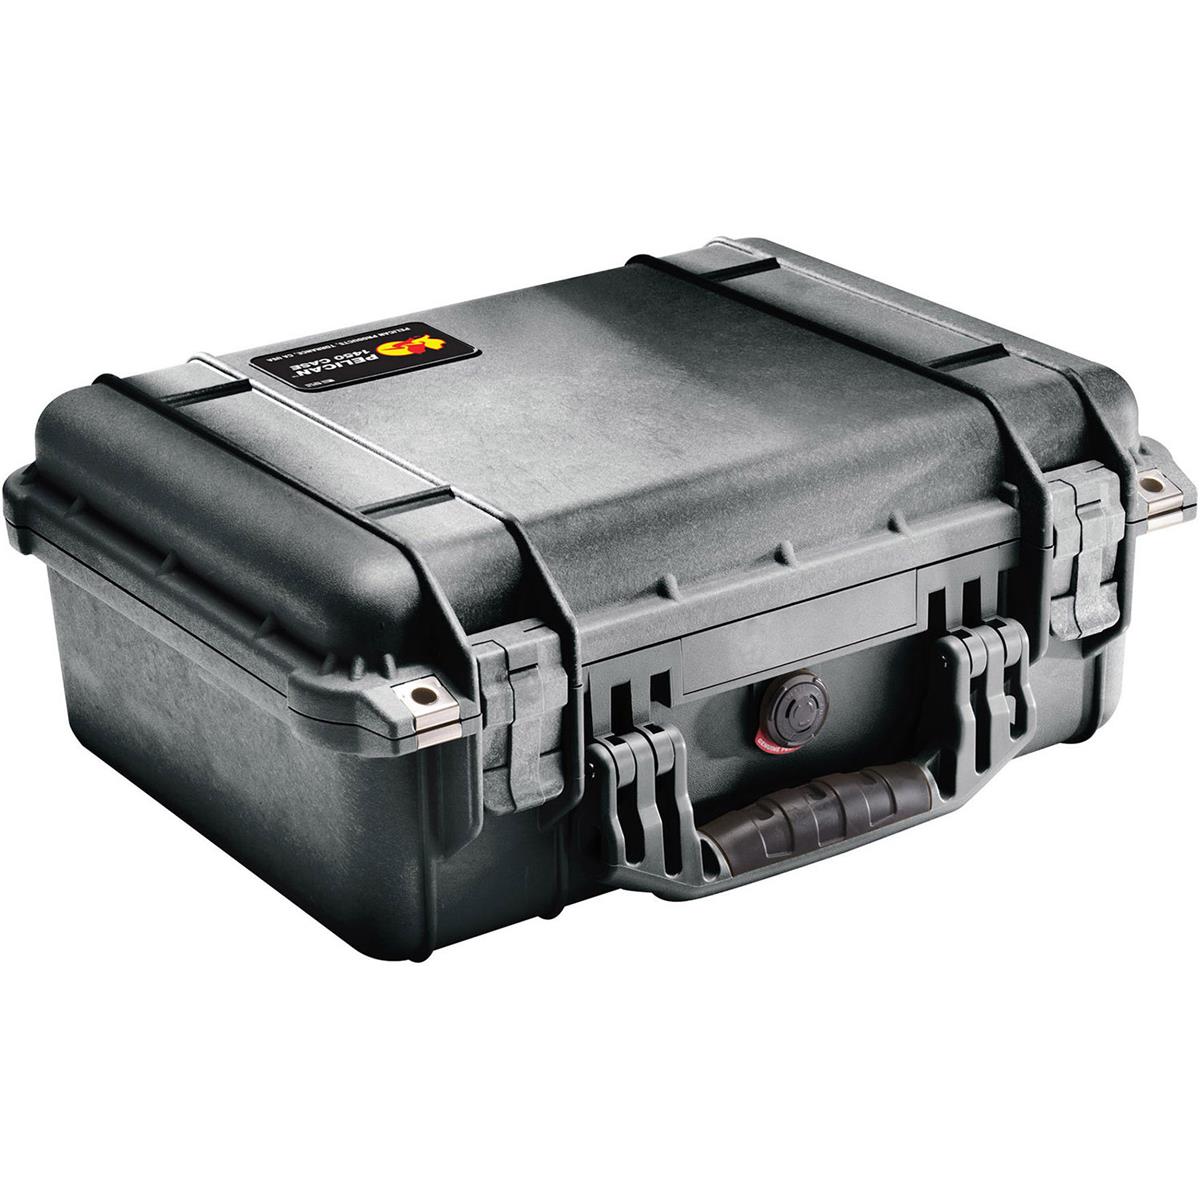 Pelican 1450 Watertight Hard Case with Padded Dividers - Black -  1450-004-110